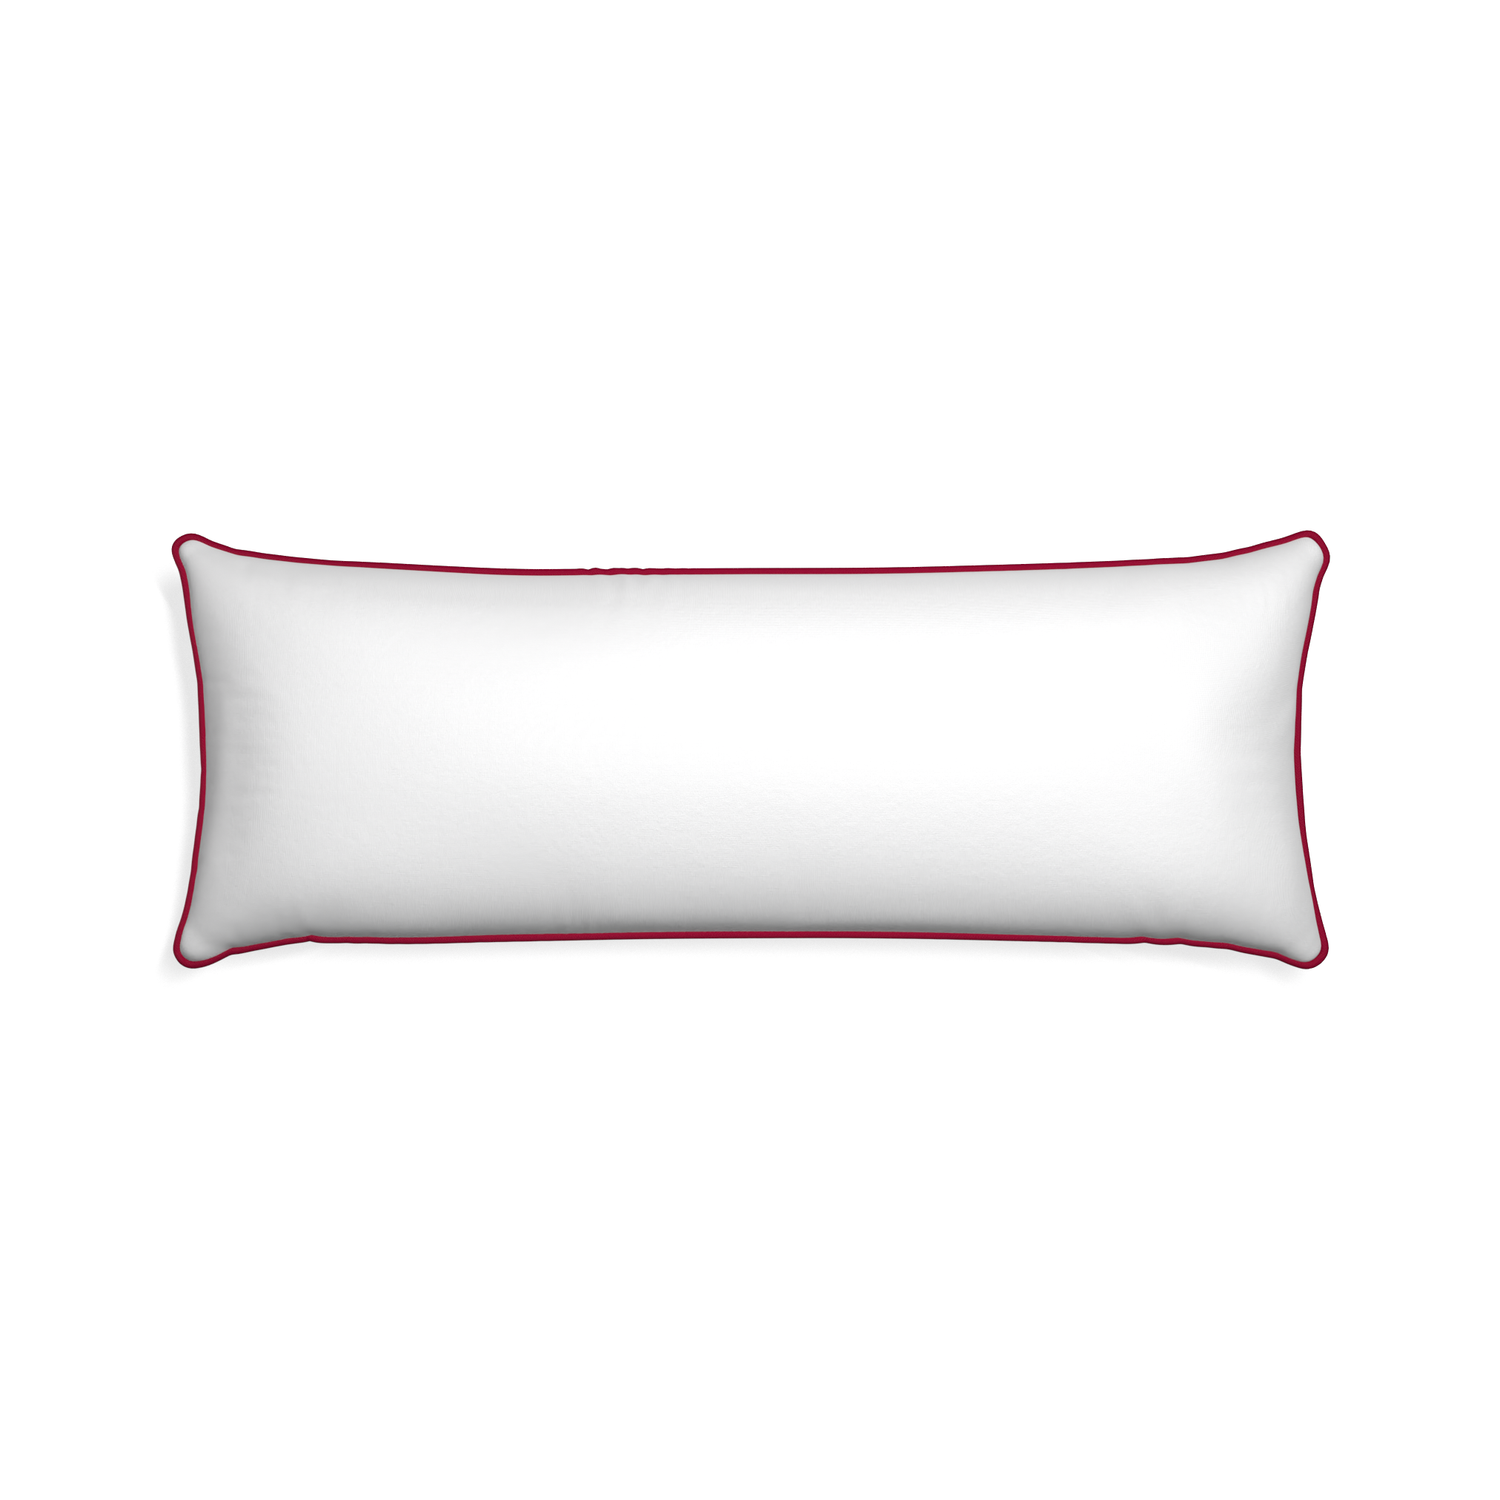 Xl-lumbar snow custom pillow with raspberry piping on white background